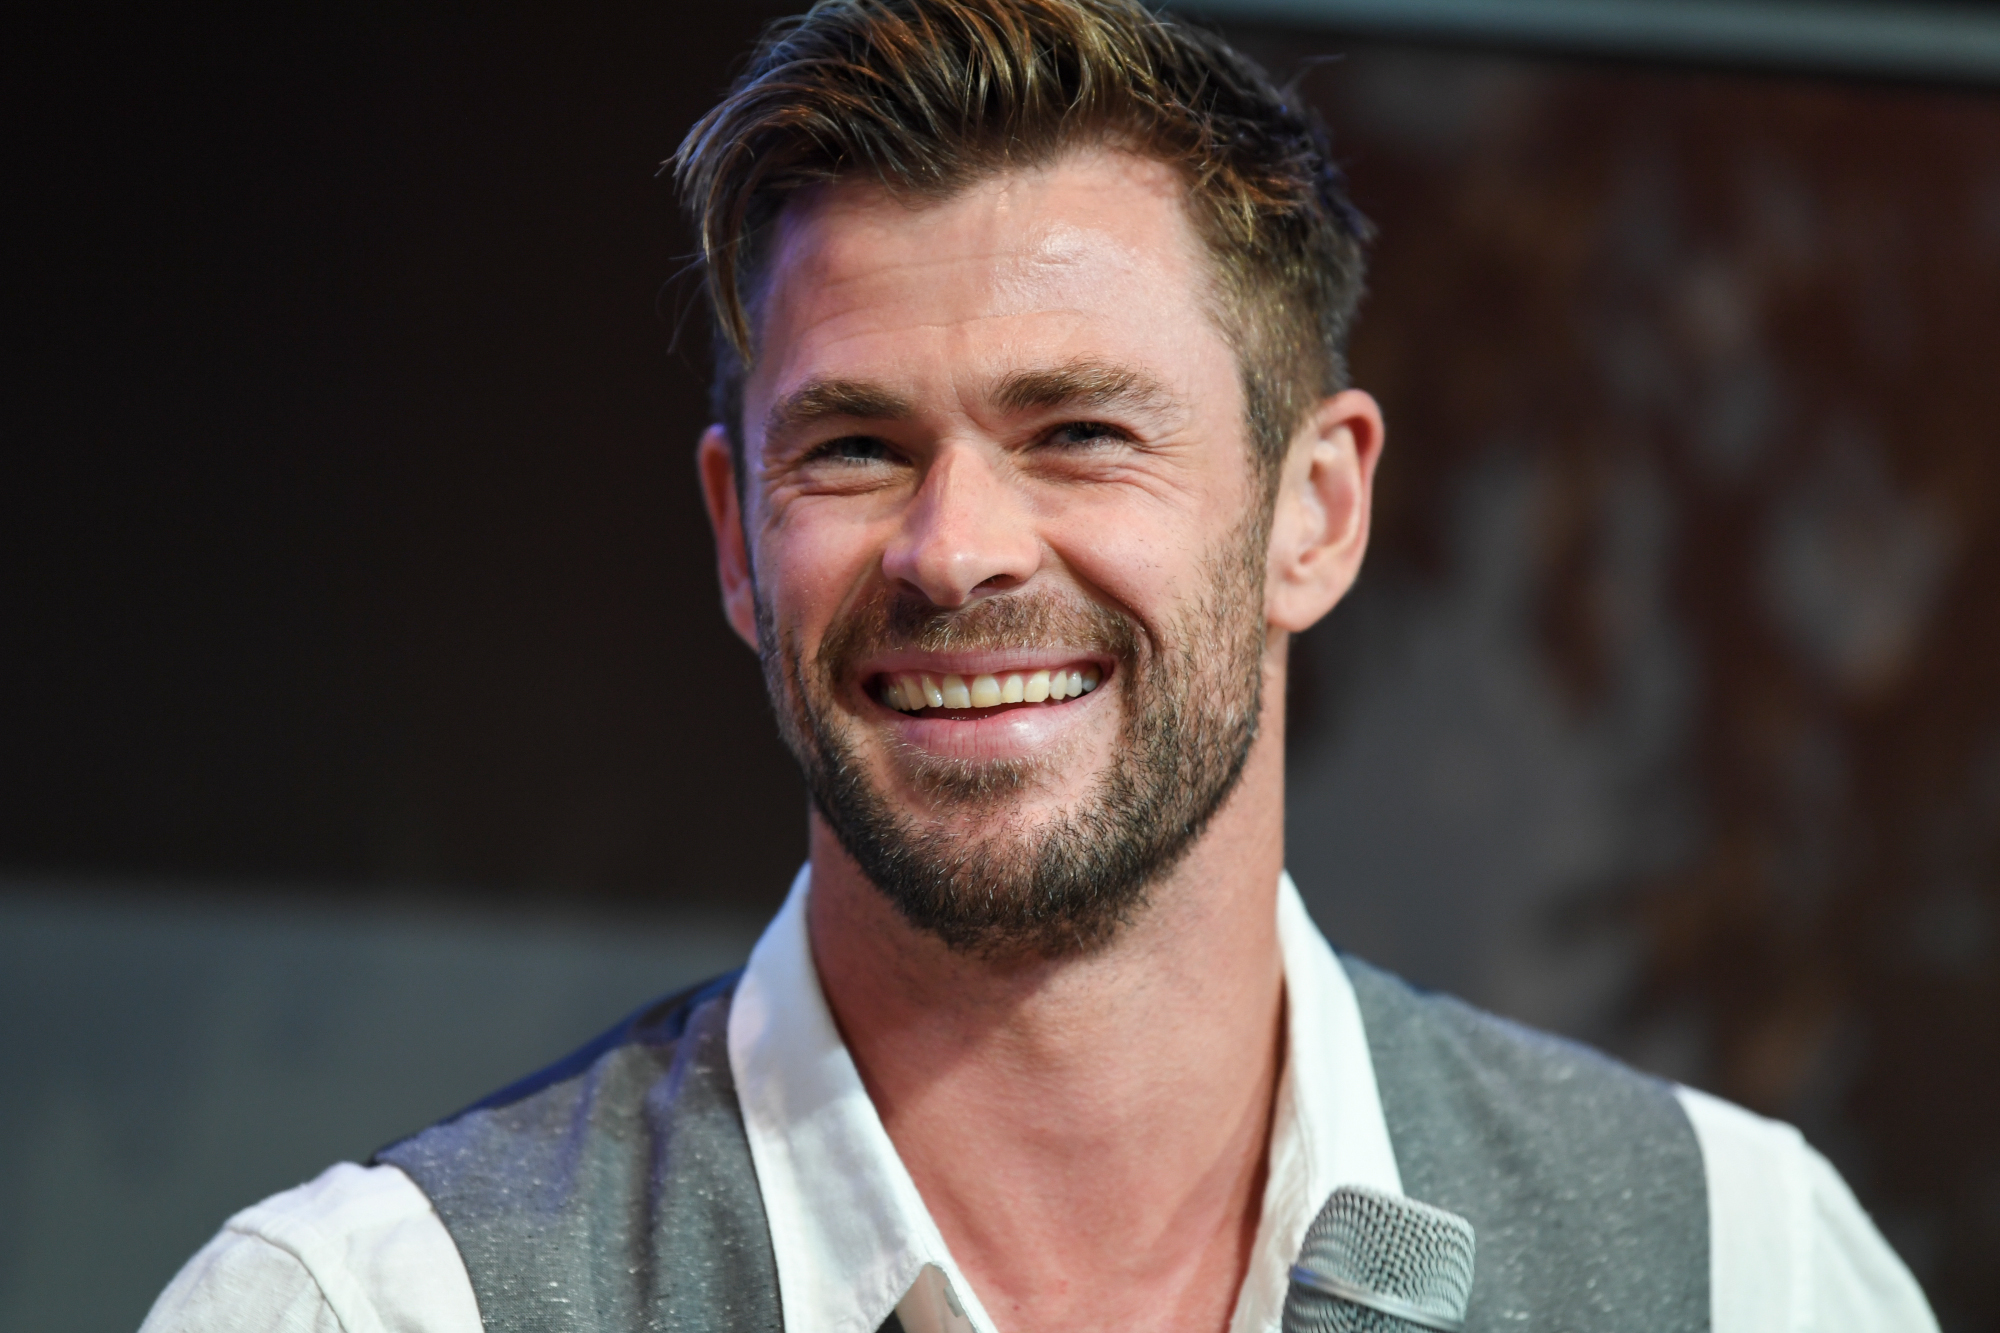 'Thor 4' star Chris Hemsworth. He's wearing a white and gray shirt and laughing.